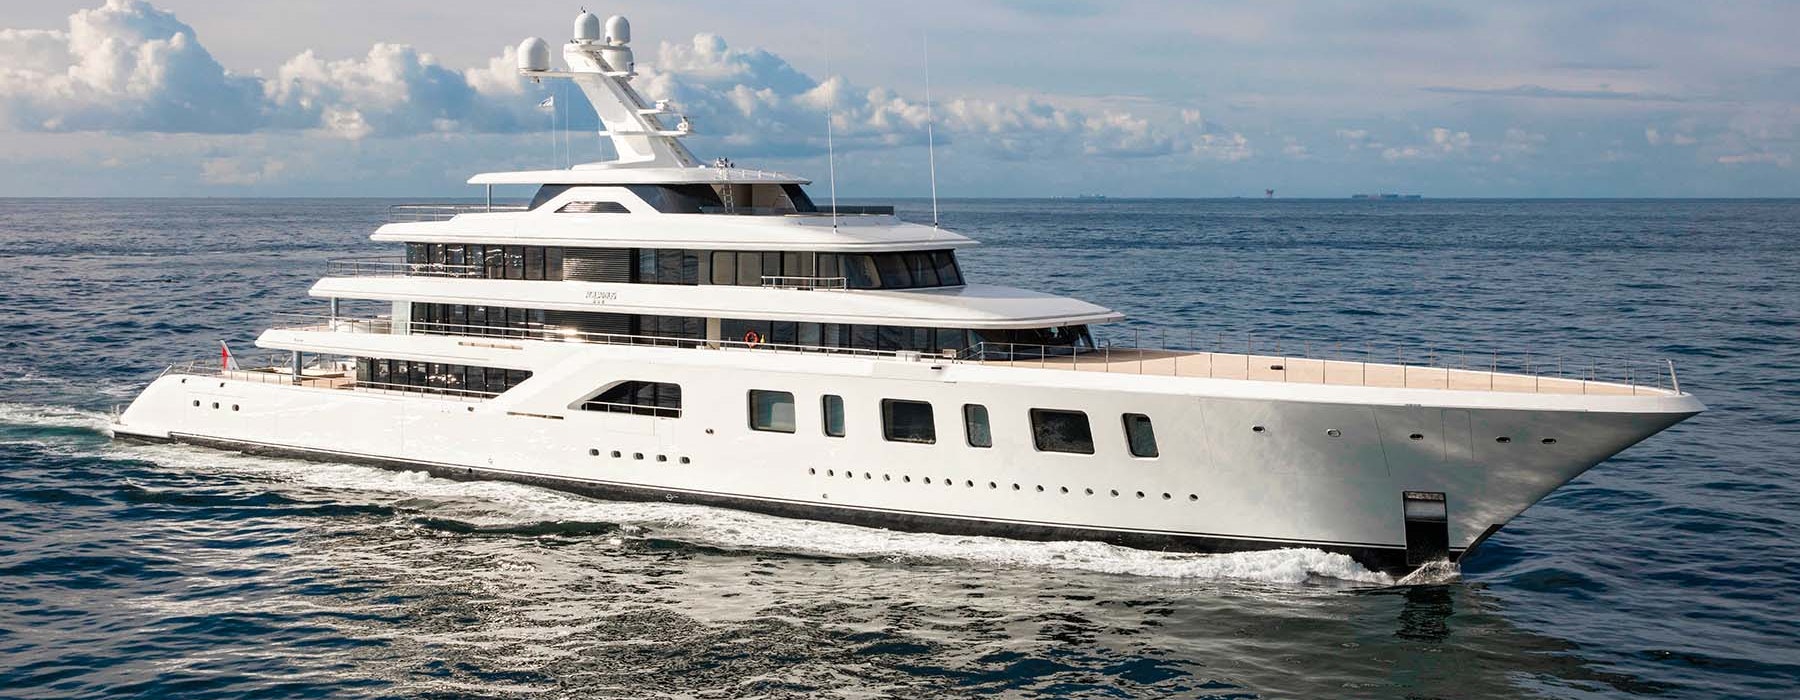 Aquarius Feadship 96m for sale with Moran Yacht and Ship